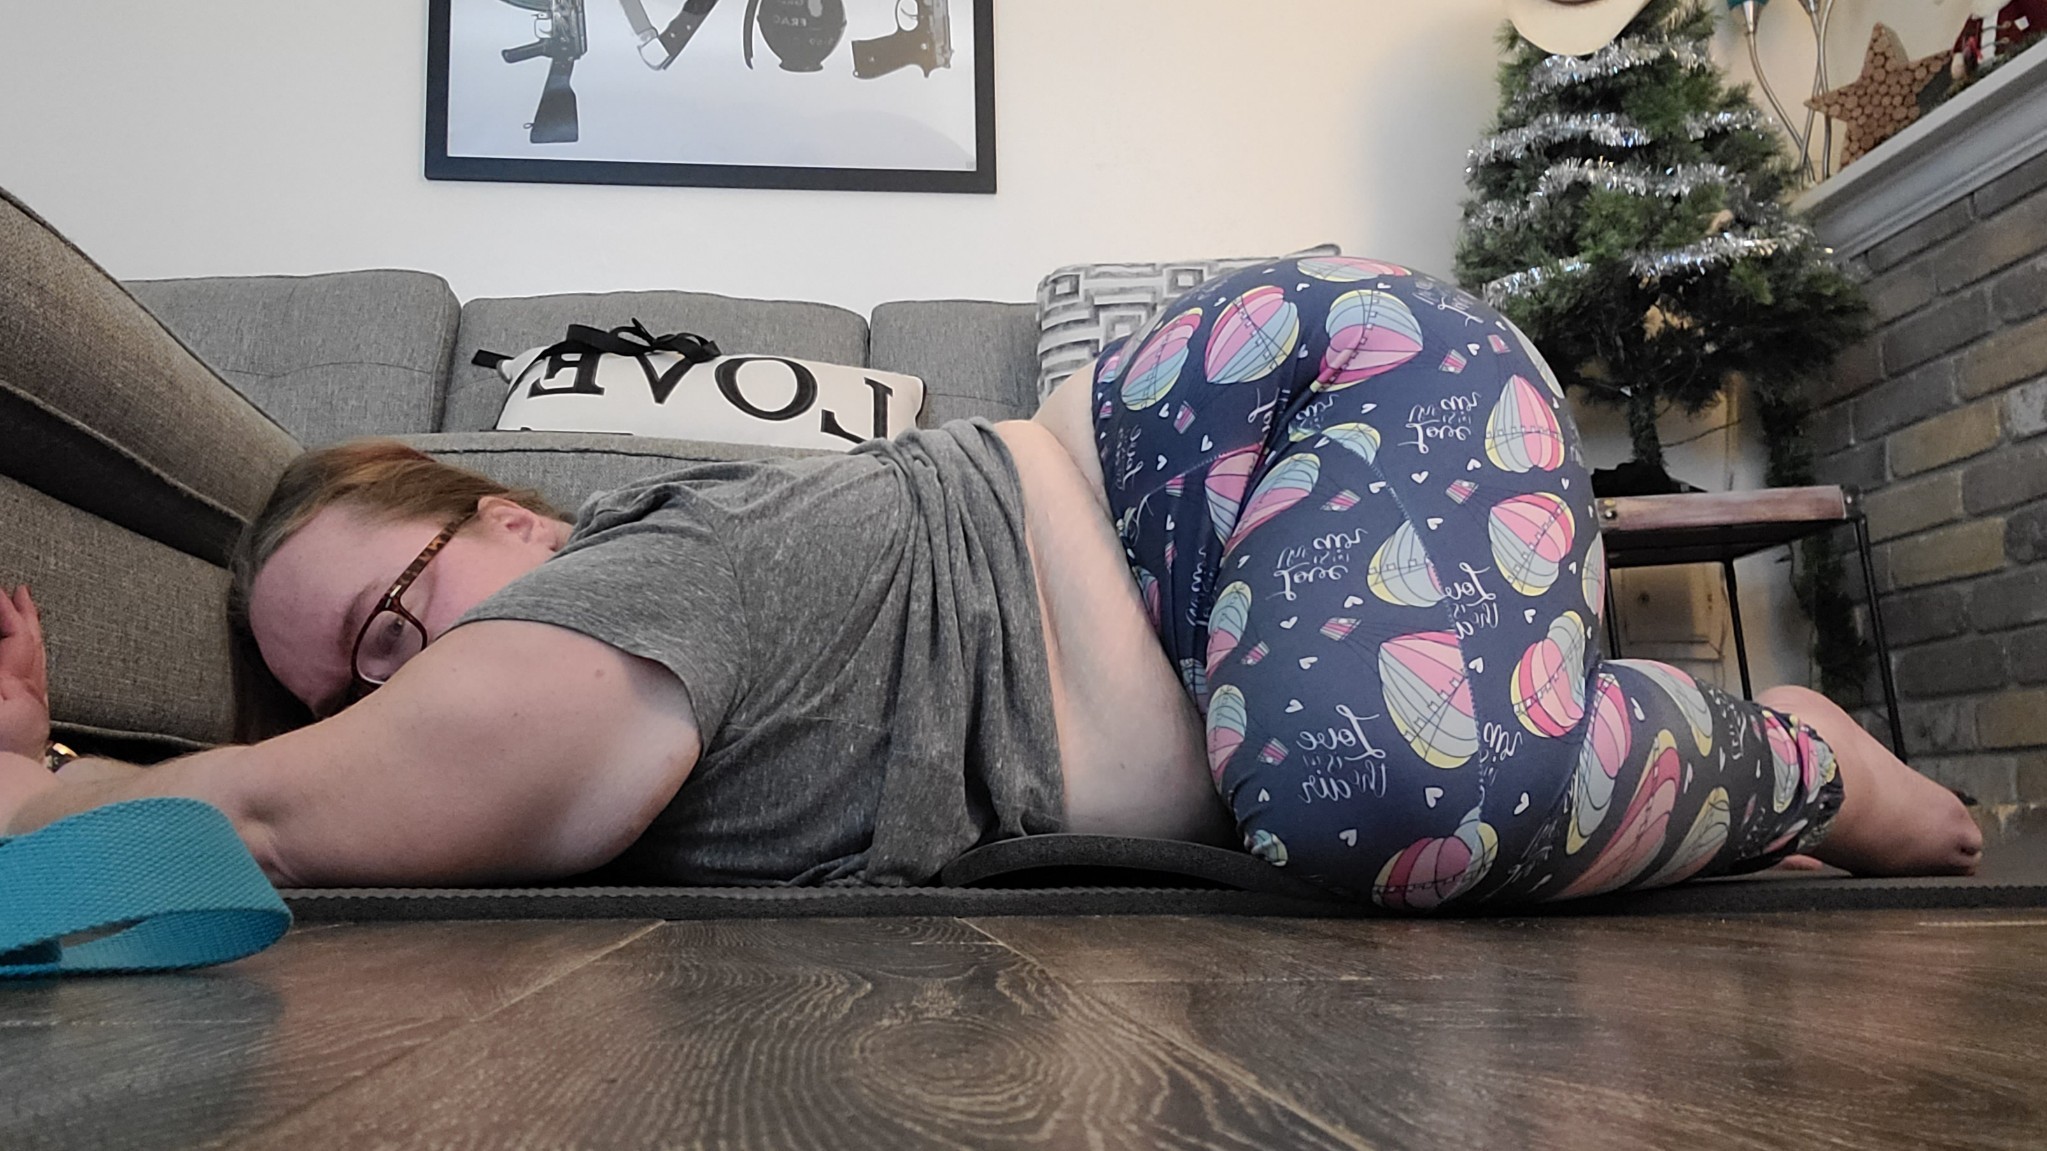 Sex bigbootiedbrat:Learning to yoga 🧘‍♀️ pictures